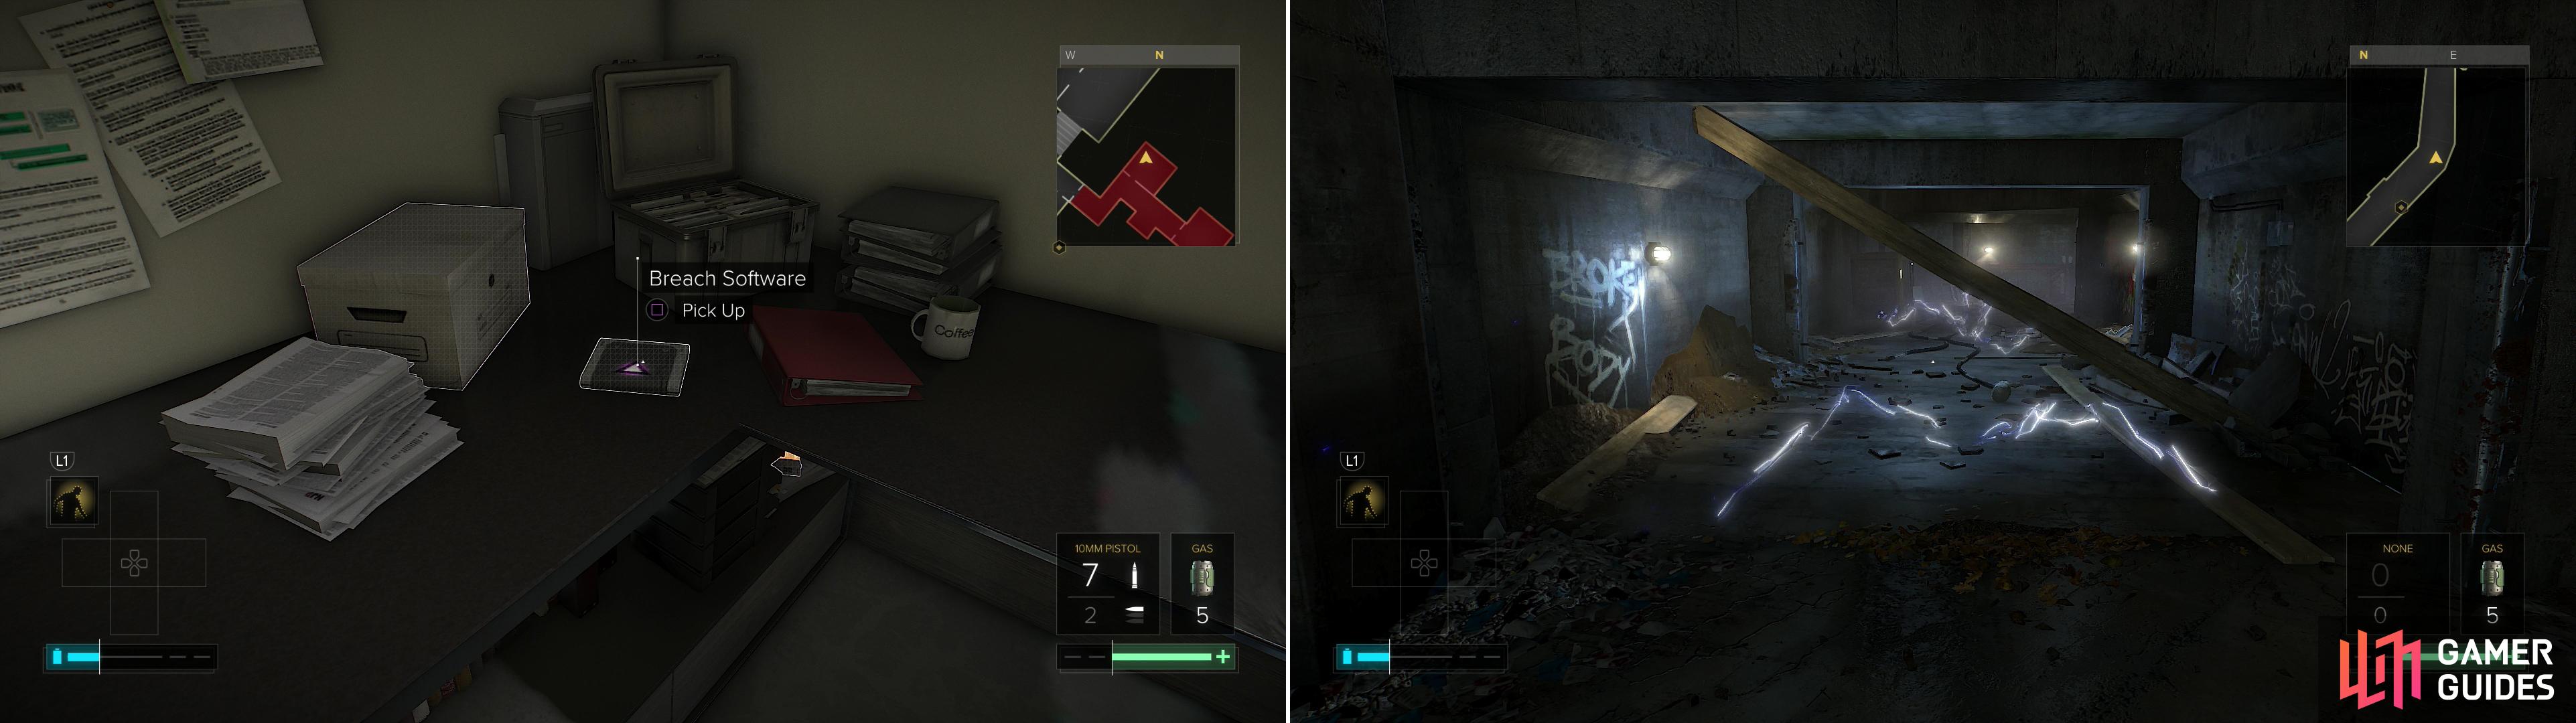 Grab some Breach Software from the security office in Pilgrim Station (left) then run through some electricity in the sewers below the station (right).